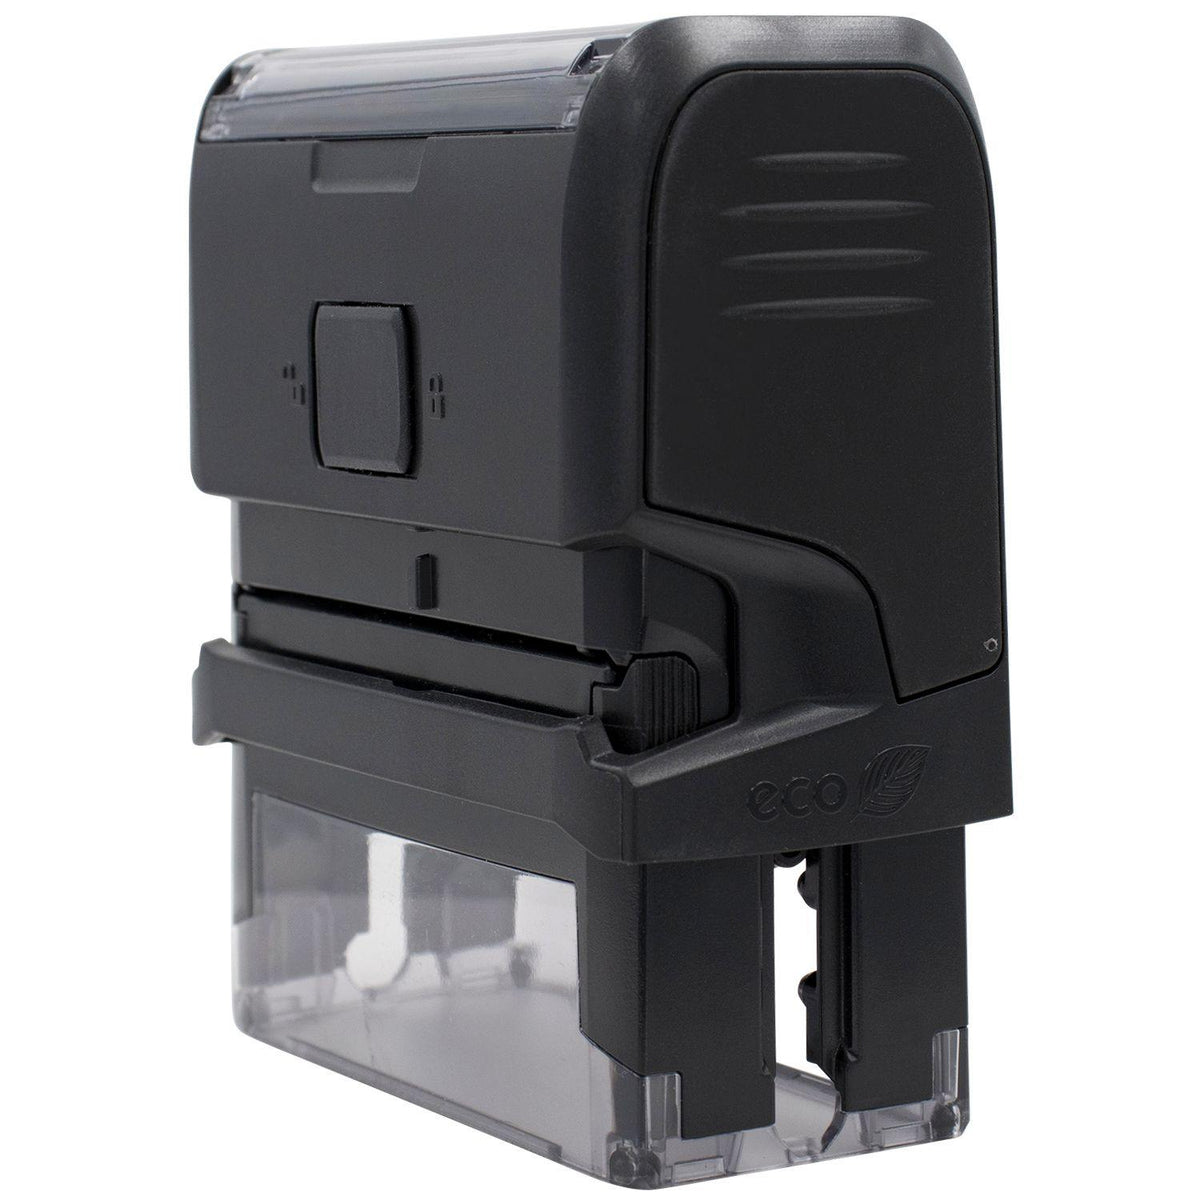 Large Self Inking Distributed Stamp With Line - Engineer Seal Stamps - Brand_Trodat, Impression Size_Large, Stamp Type_Self-Inking Stamp, Type of Use_Professional